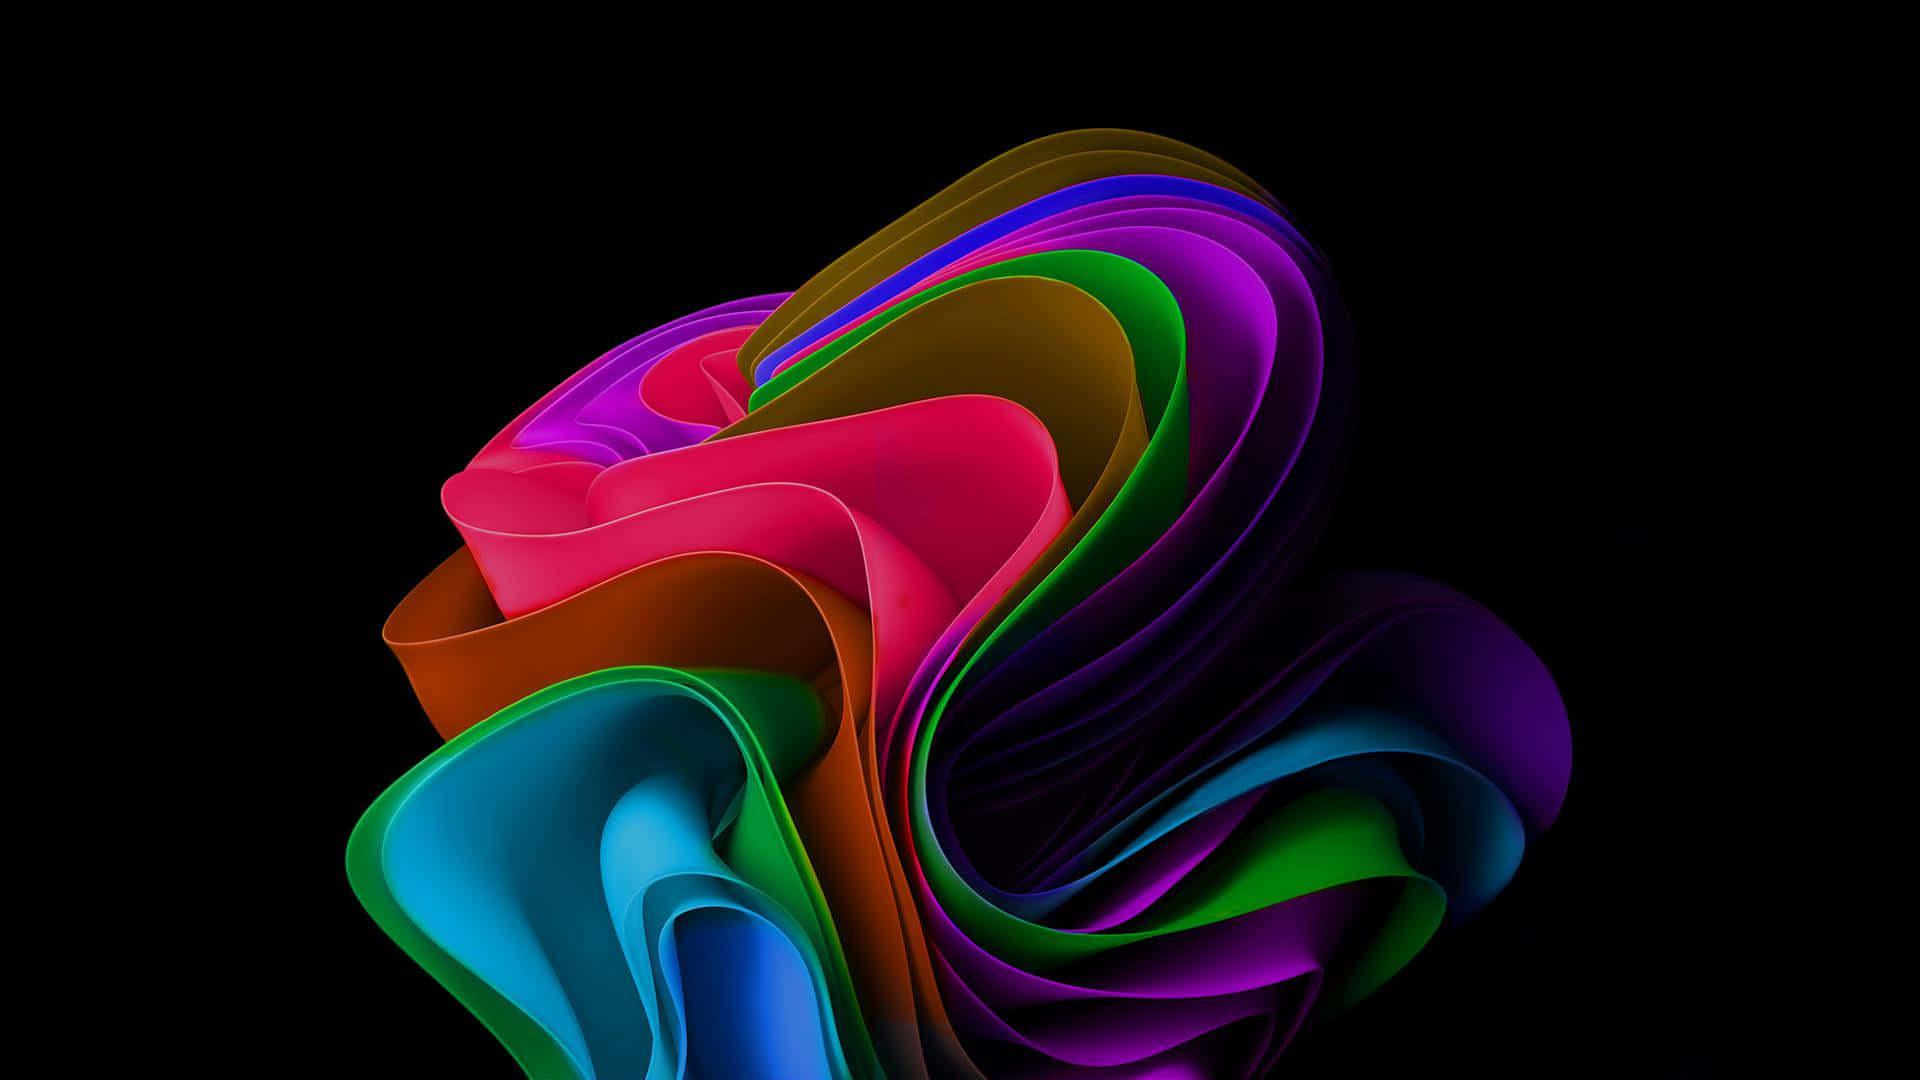 A Colorful Abstract Design On A Black Background